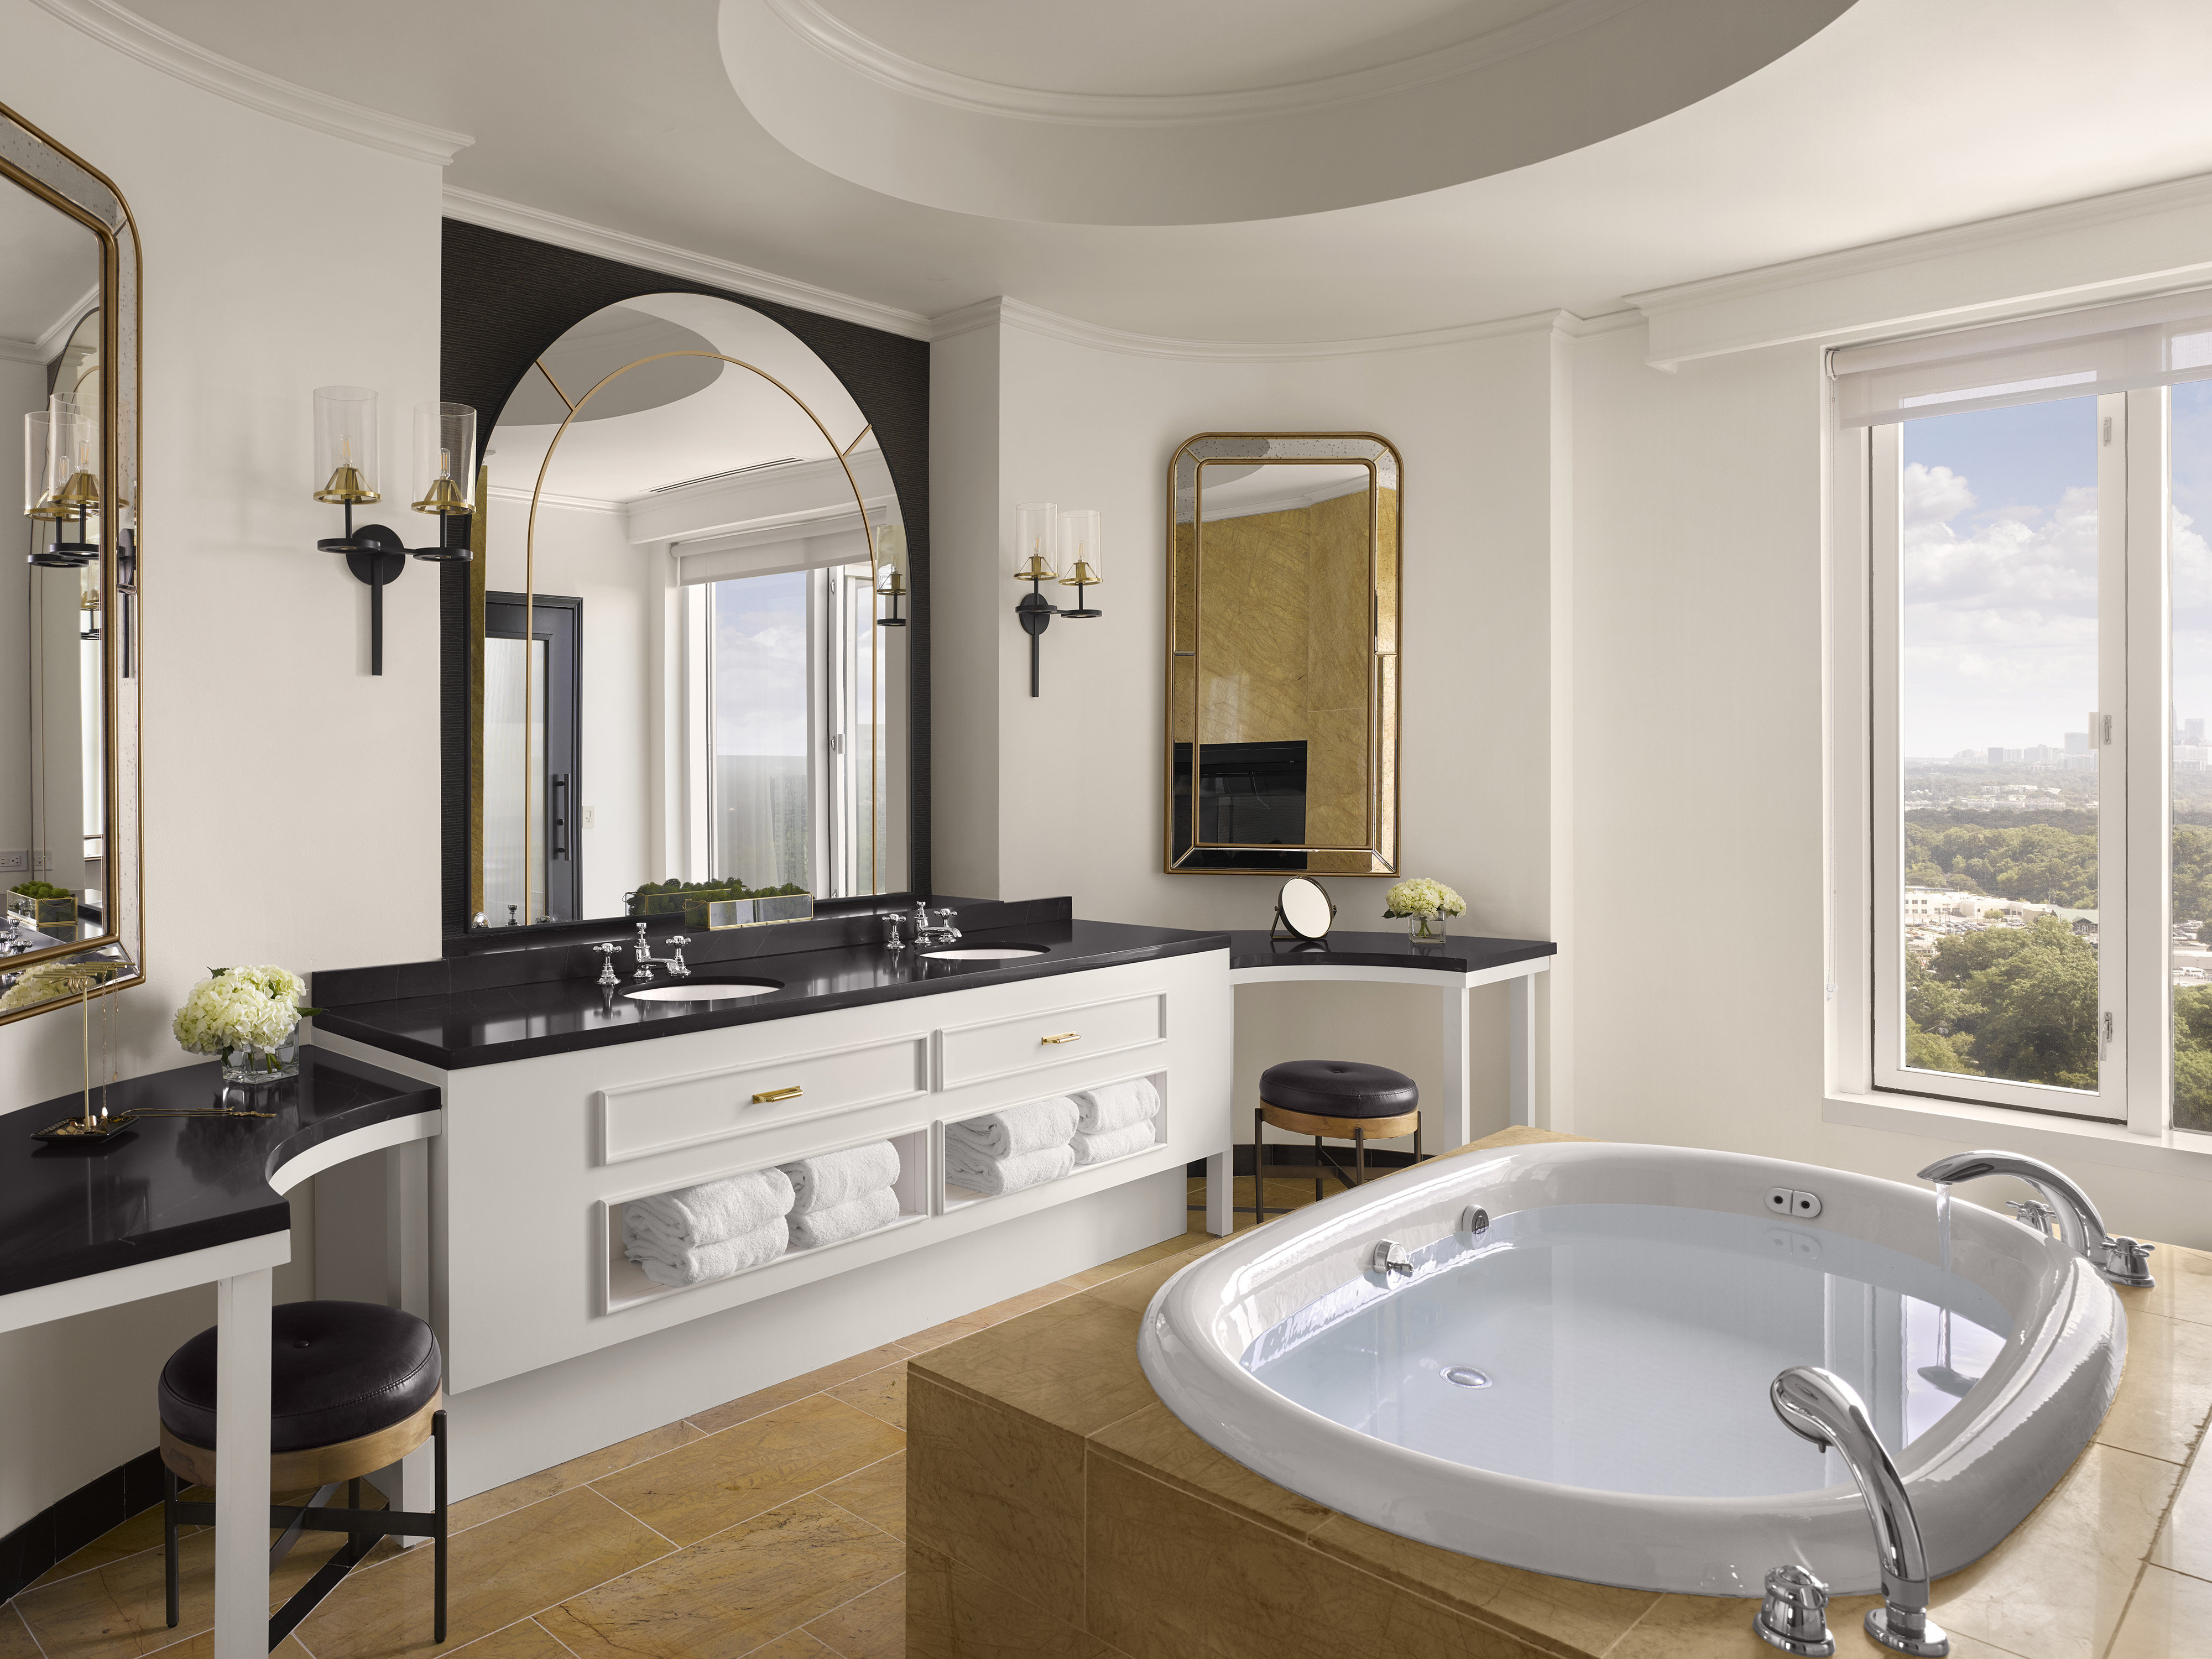 Double sinks and soaking tub